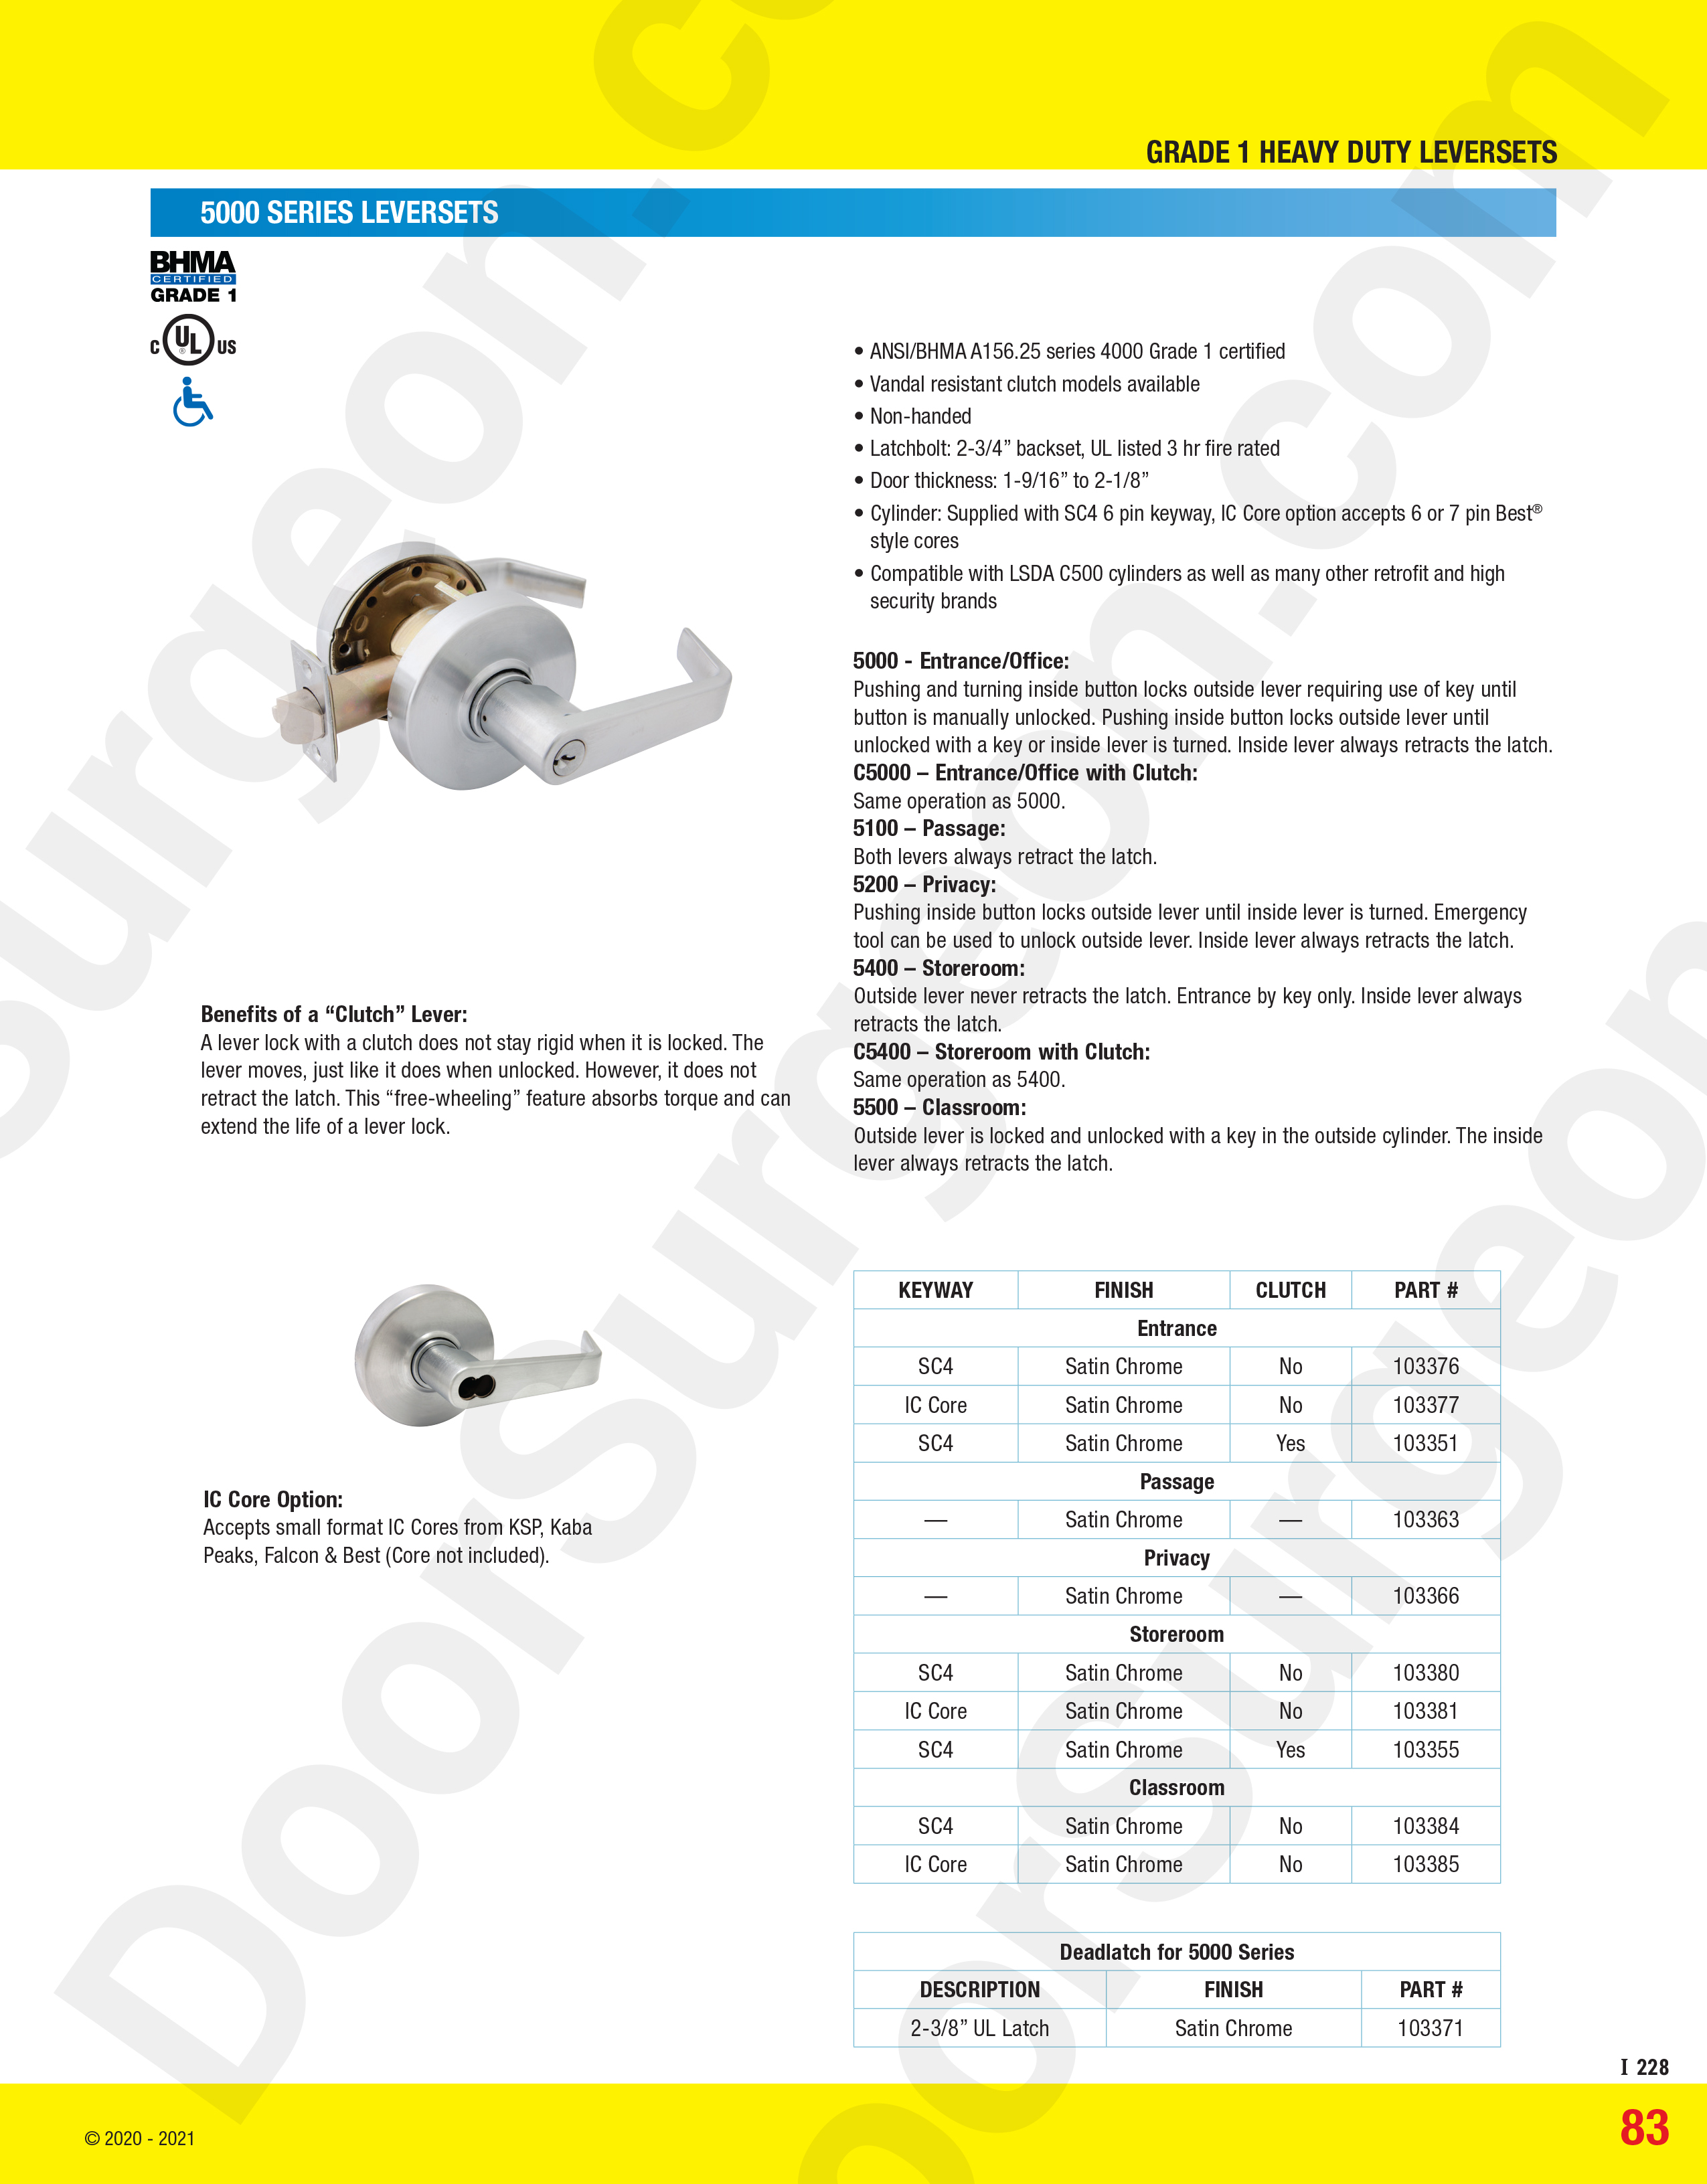 Vandal resistant clutch model, latch-bolt at 2-3/4 inch, fits door thickness 1-9/16 to 2-1/8 inch.